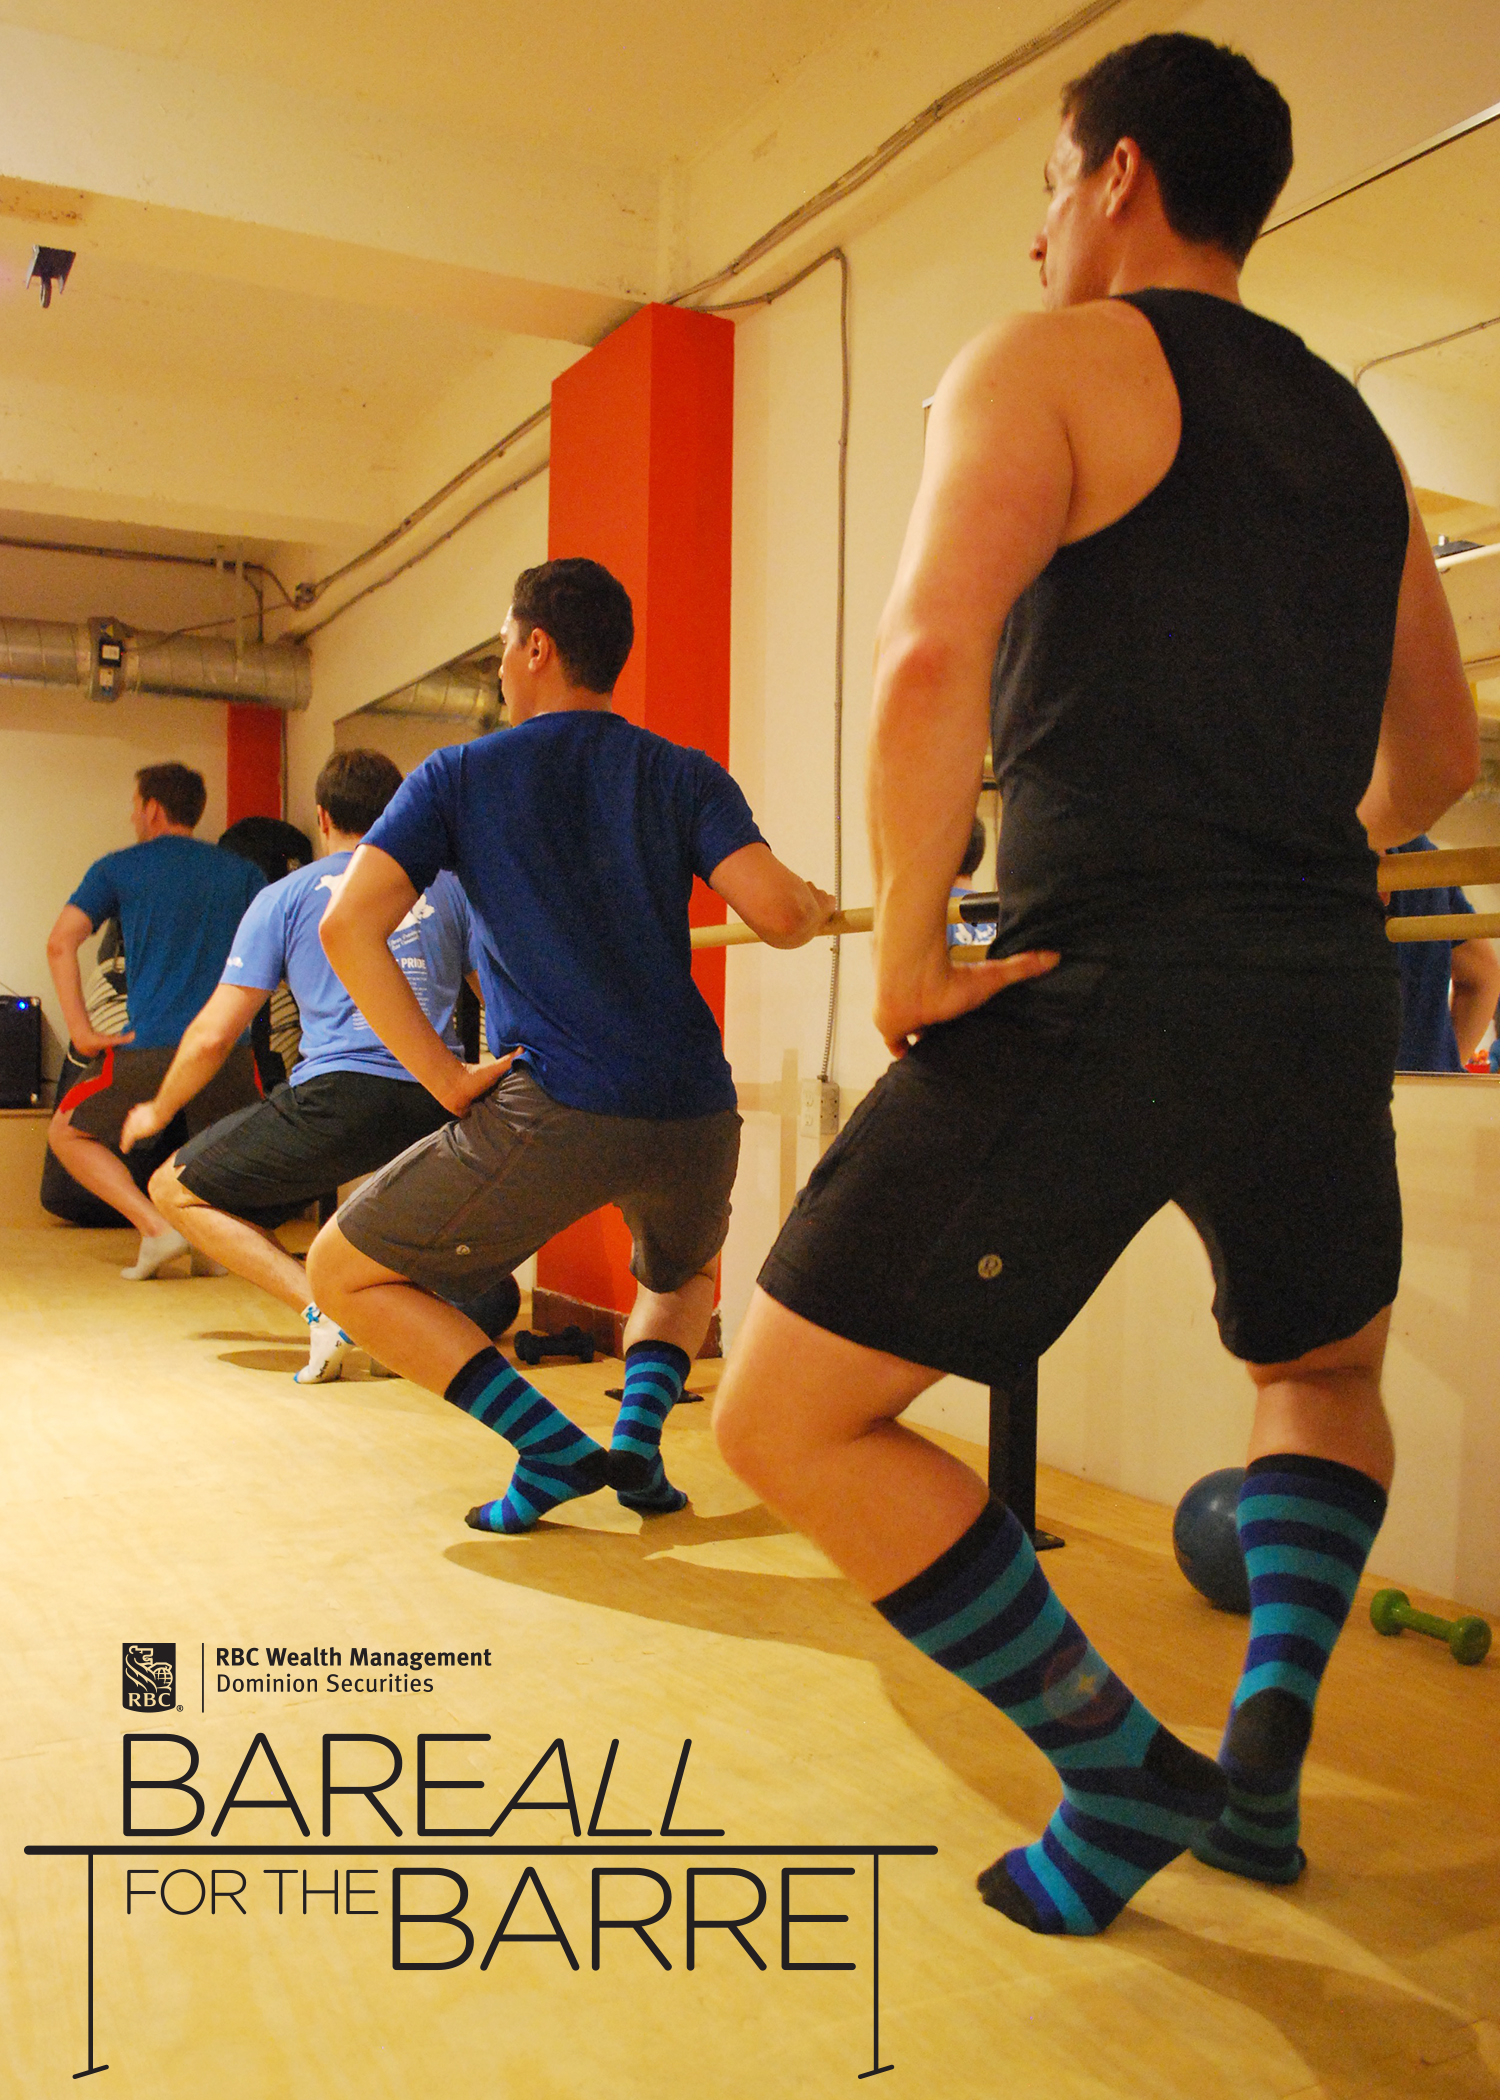 meet us at the barre